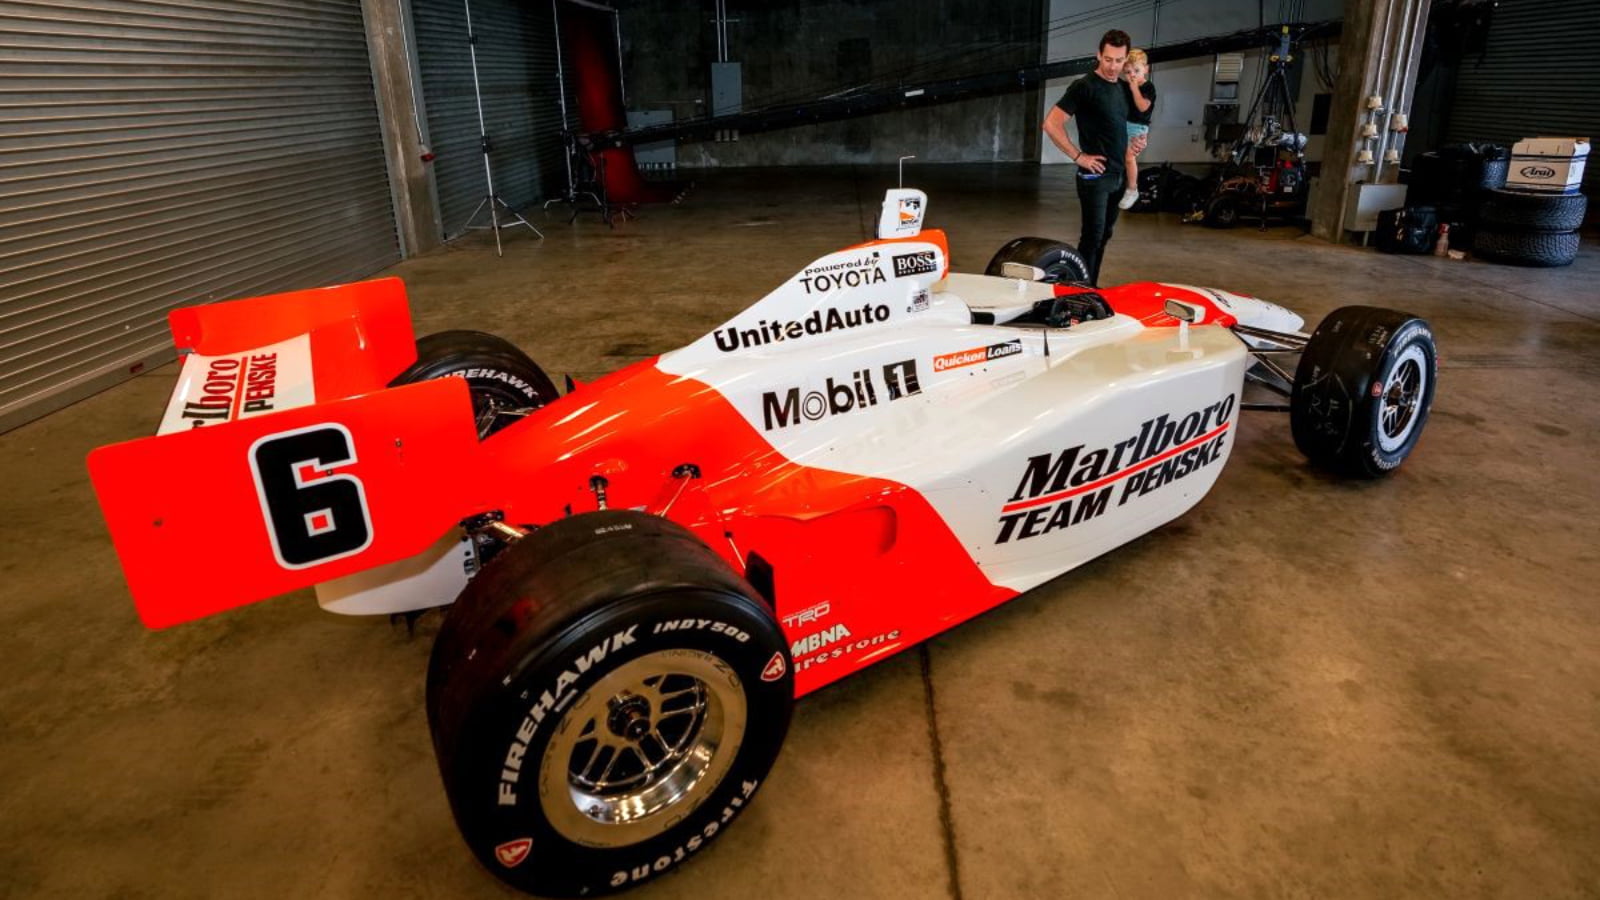 Reviving History: Pagenaud Rides Again in the Iconic 2003 Indy 500 Winning Car